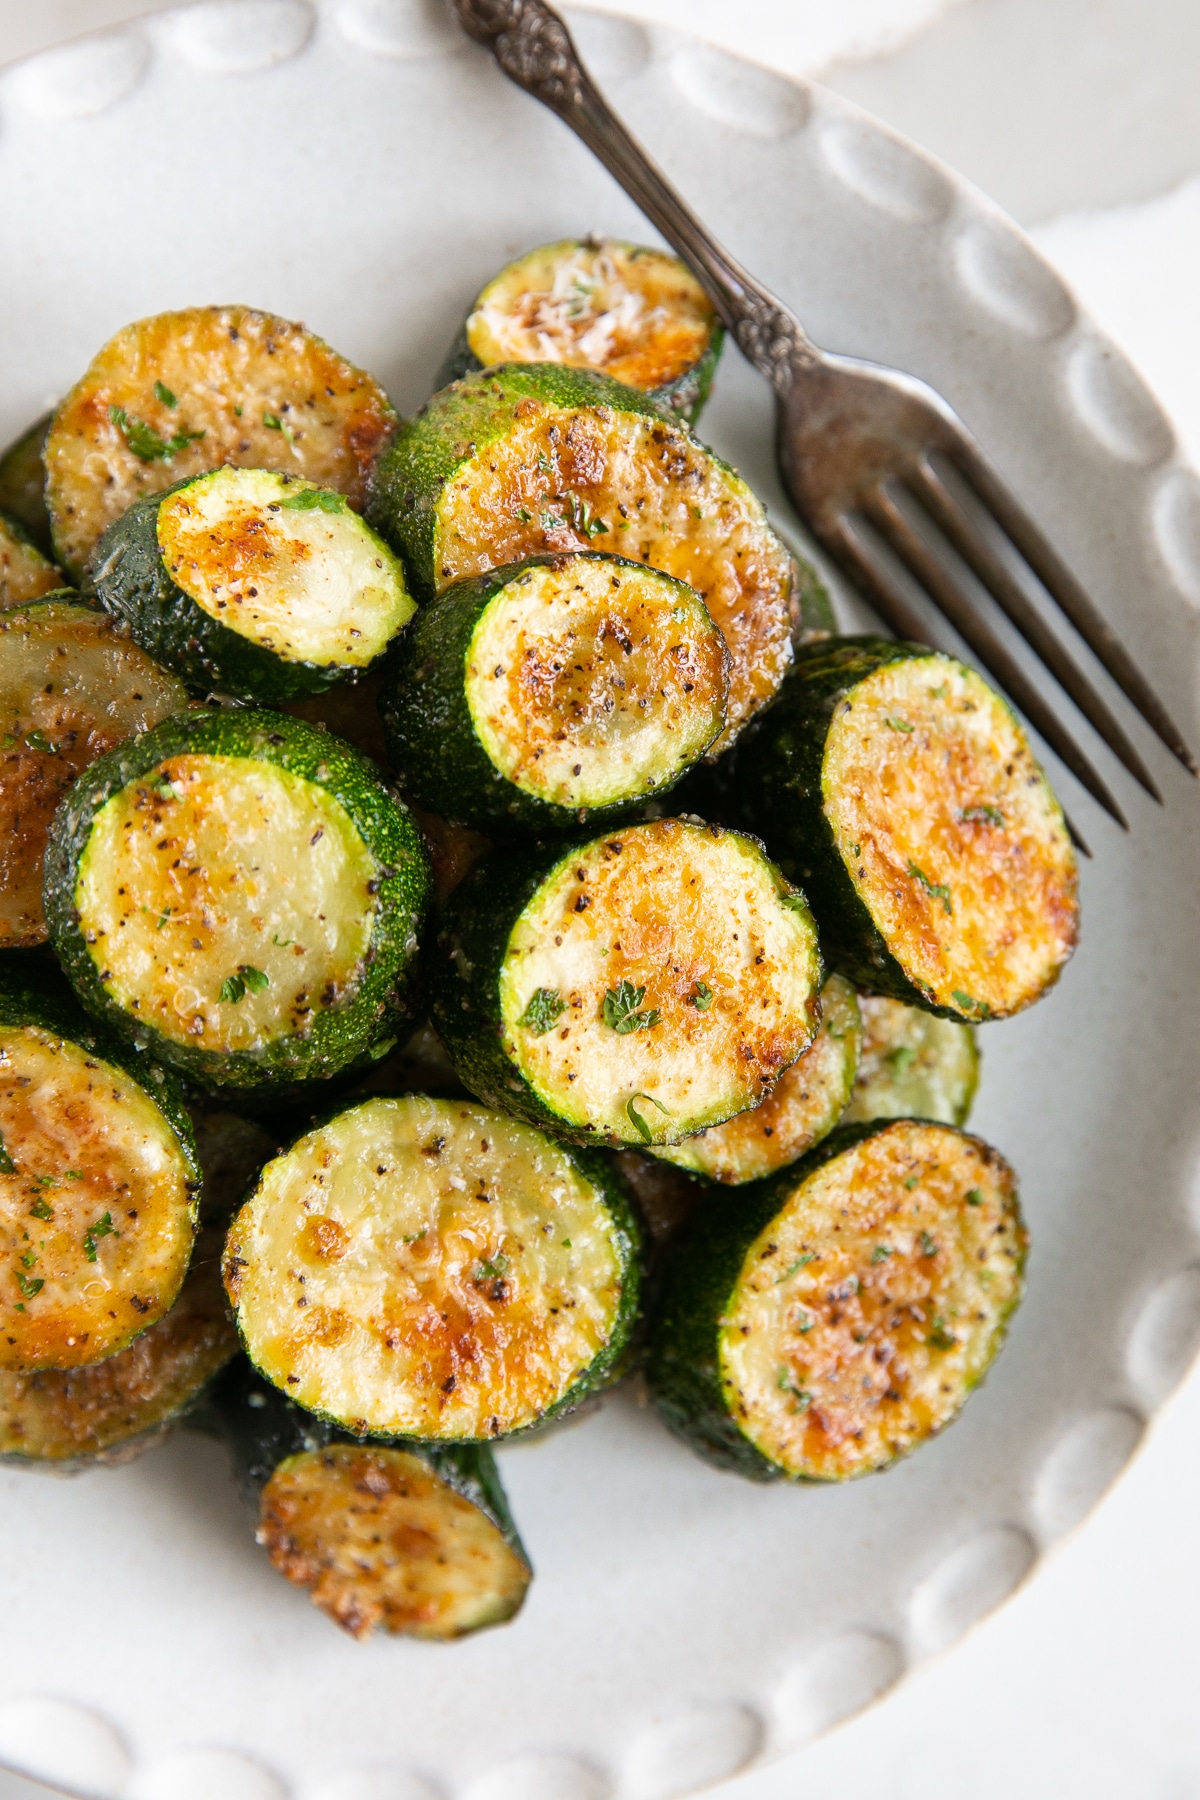 Grilled zucchini on a white plate with a fork.